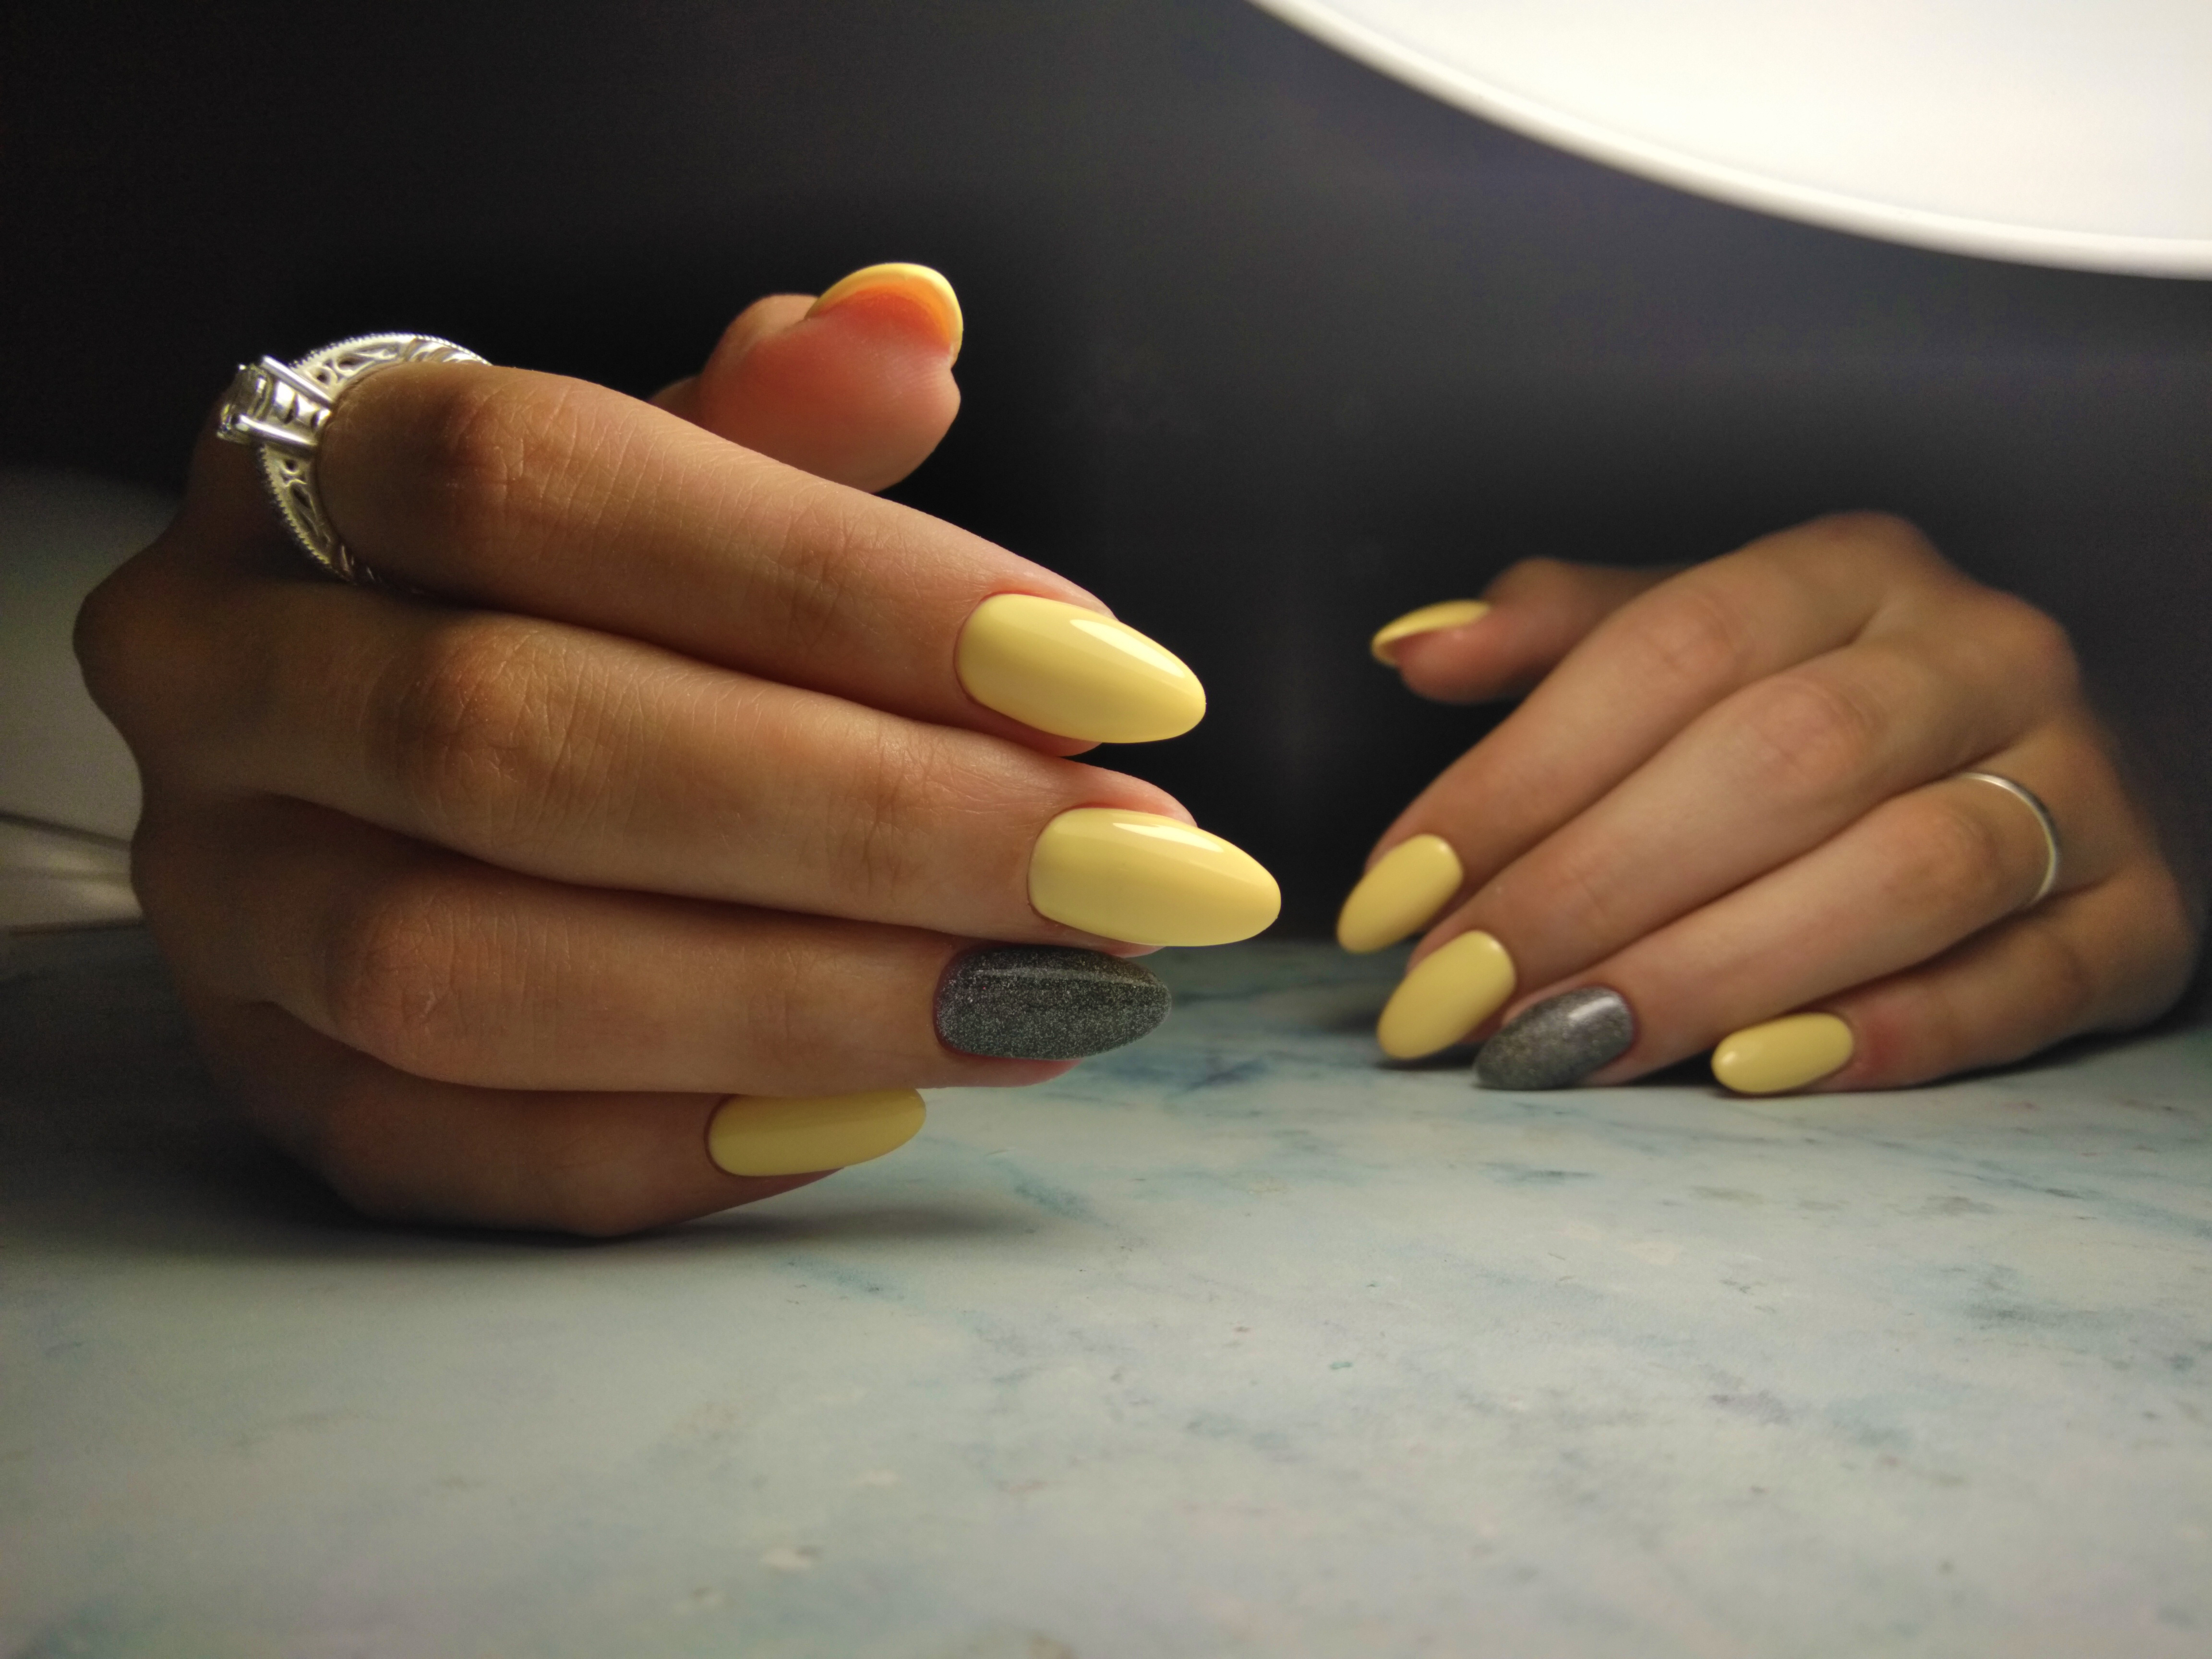 Yellow and gray accent nails. | Source: Getty Images